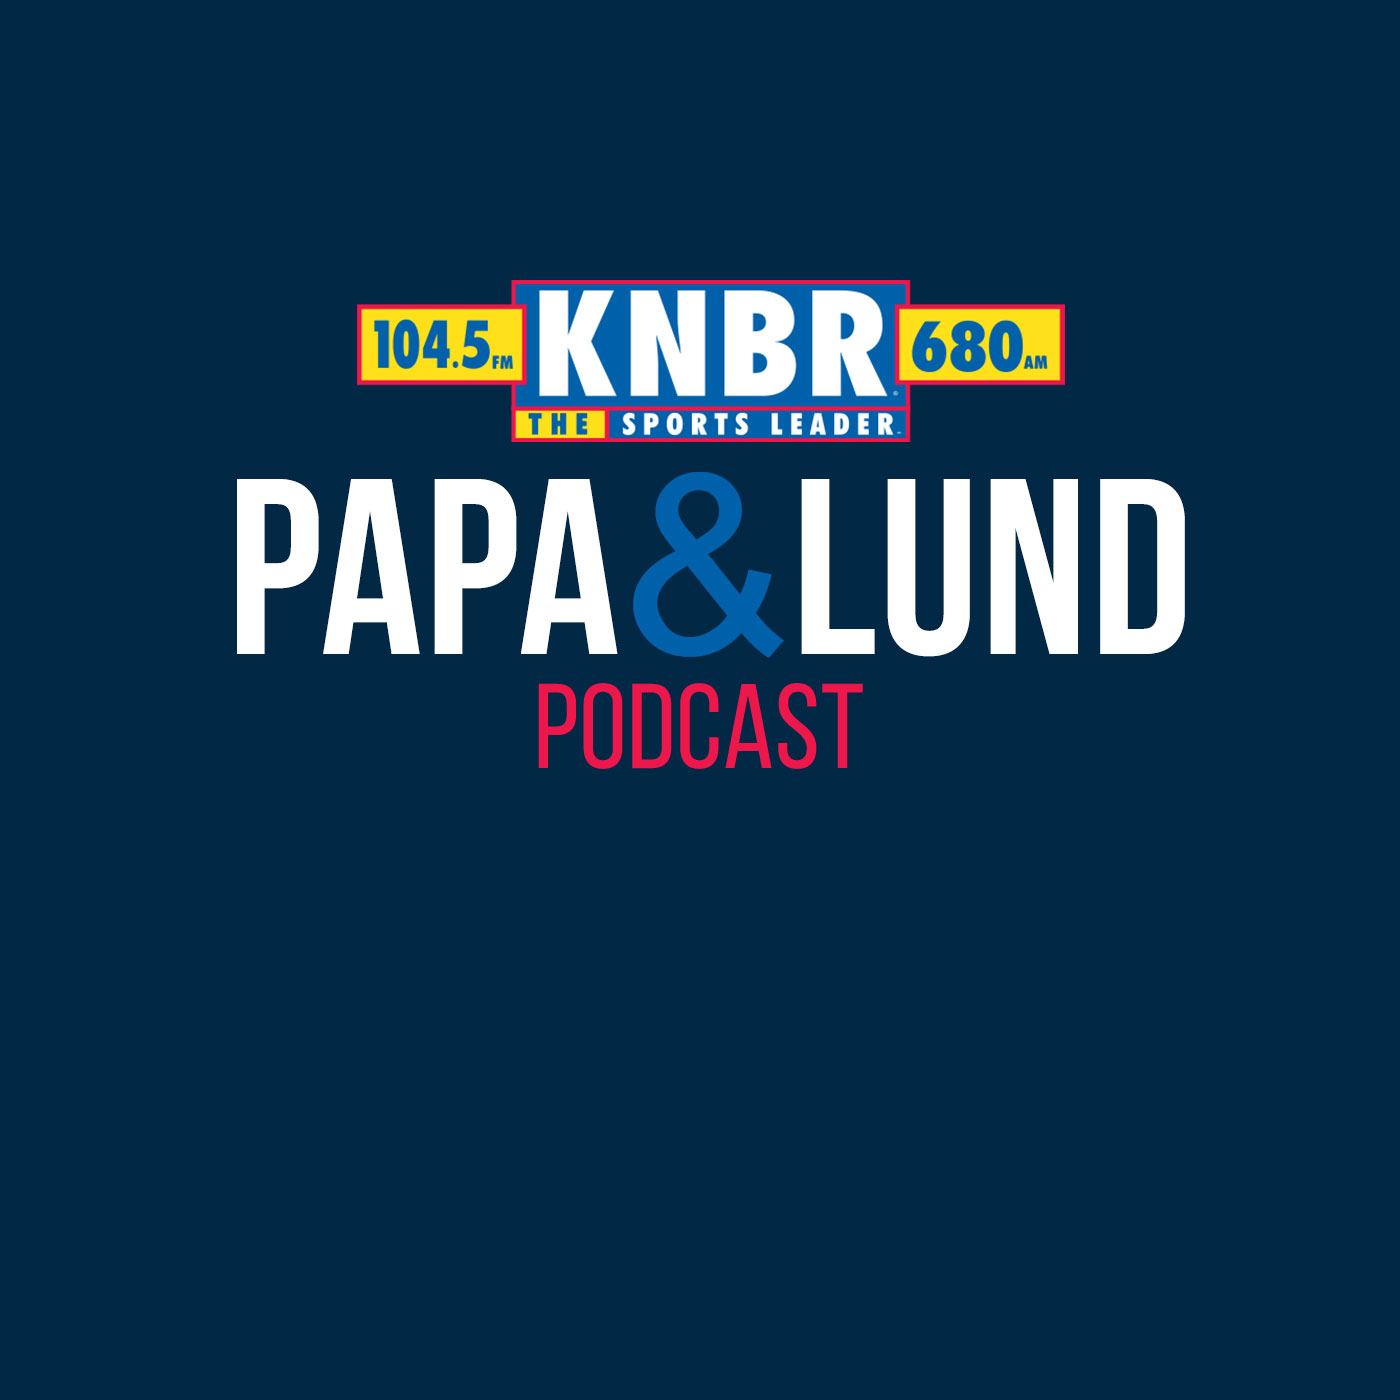 6-21 Marc Spears joins Papa & Lund to break down the Warriors championship season and discuss the market value for Kevon Looney & Gary Payton II and what it may take for the Warriors to keep them